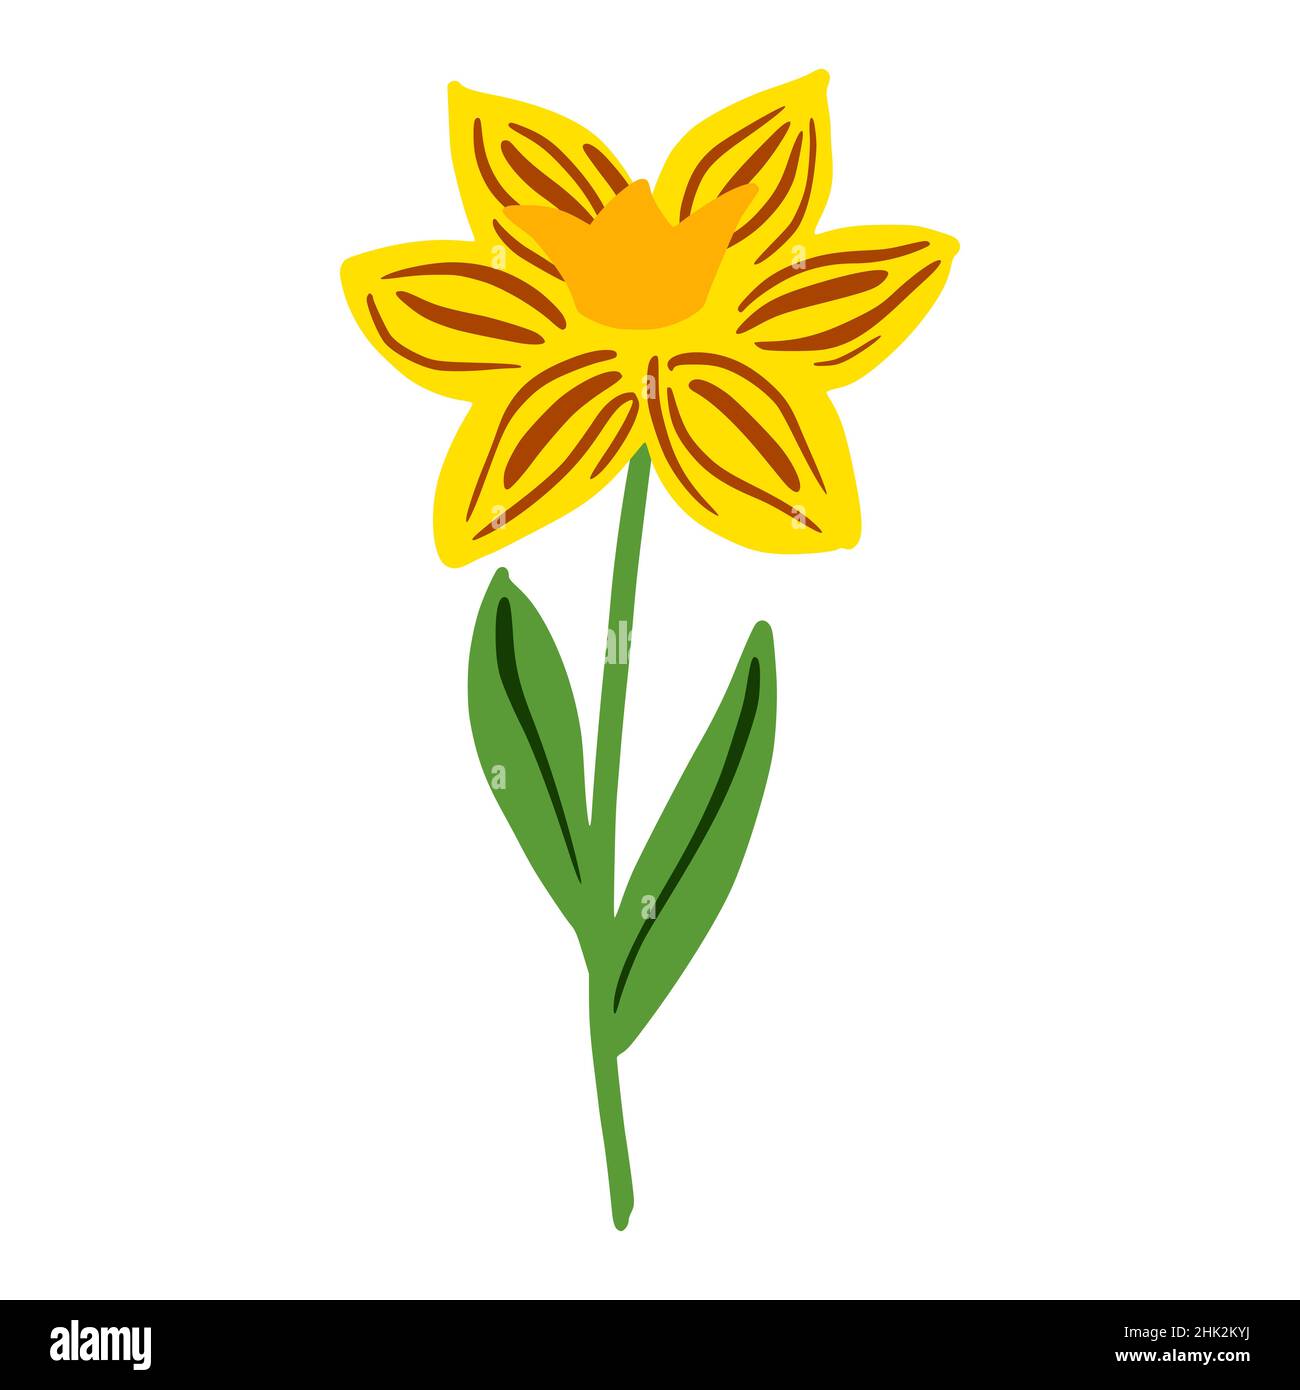 Daffodil isolated on white background. Beautiful hand drawn botanical sketch flower for any purpose. Design vector illustration. Stock Vector